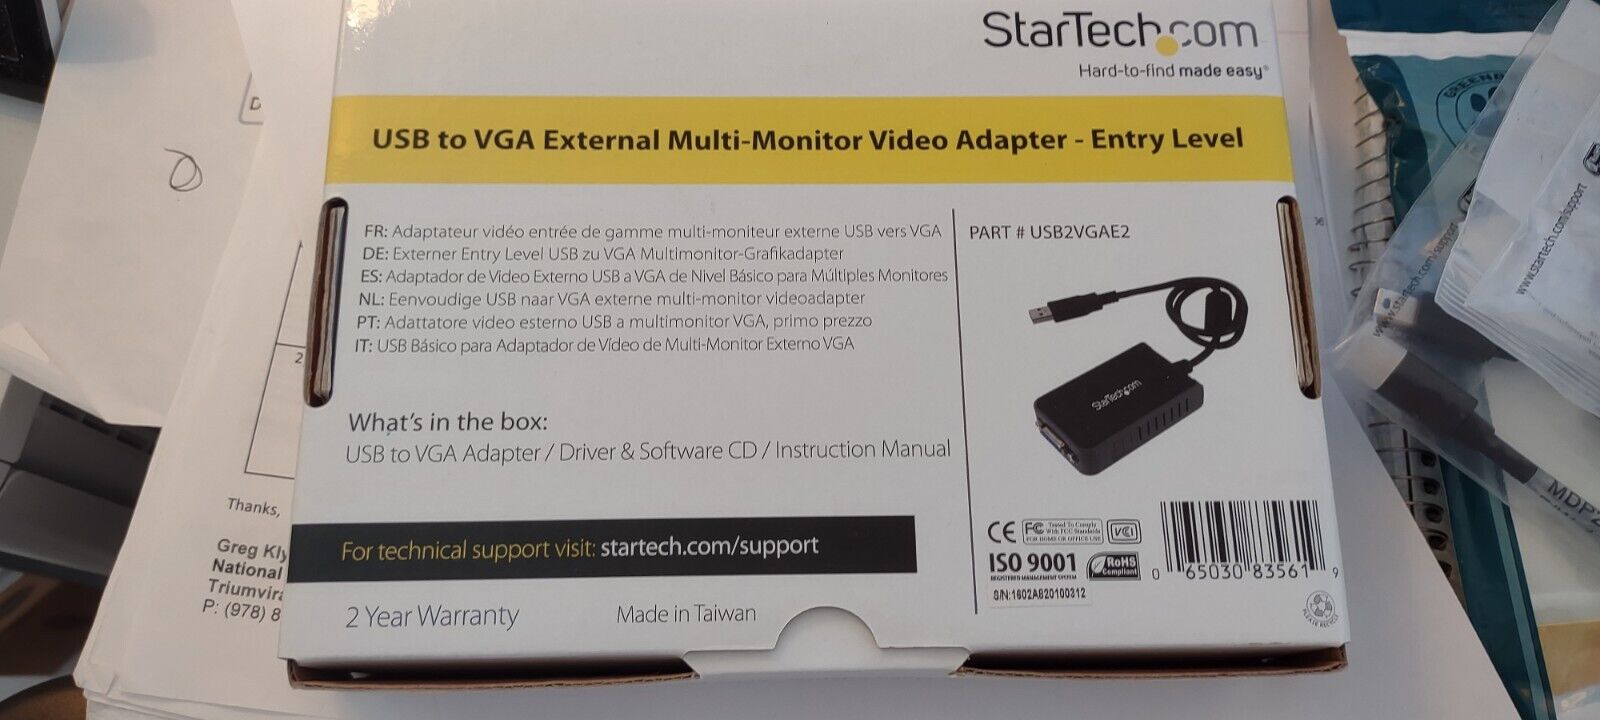 USB to VGA External Multi-Monitor Video Adapter- Entry Level.